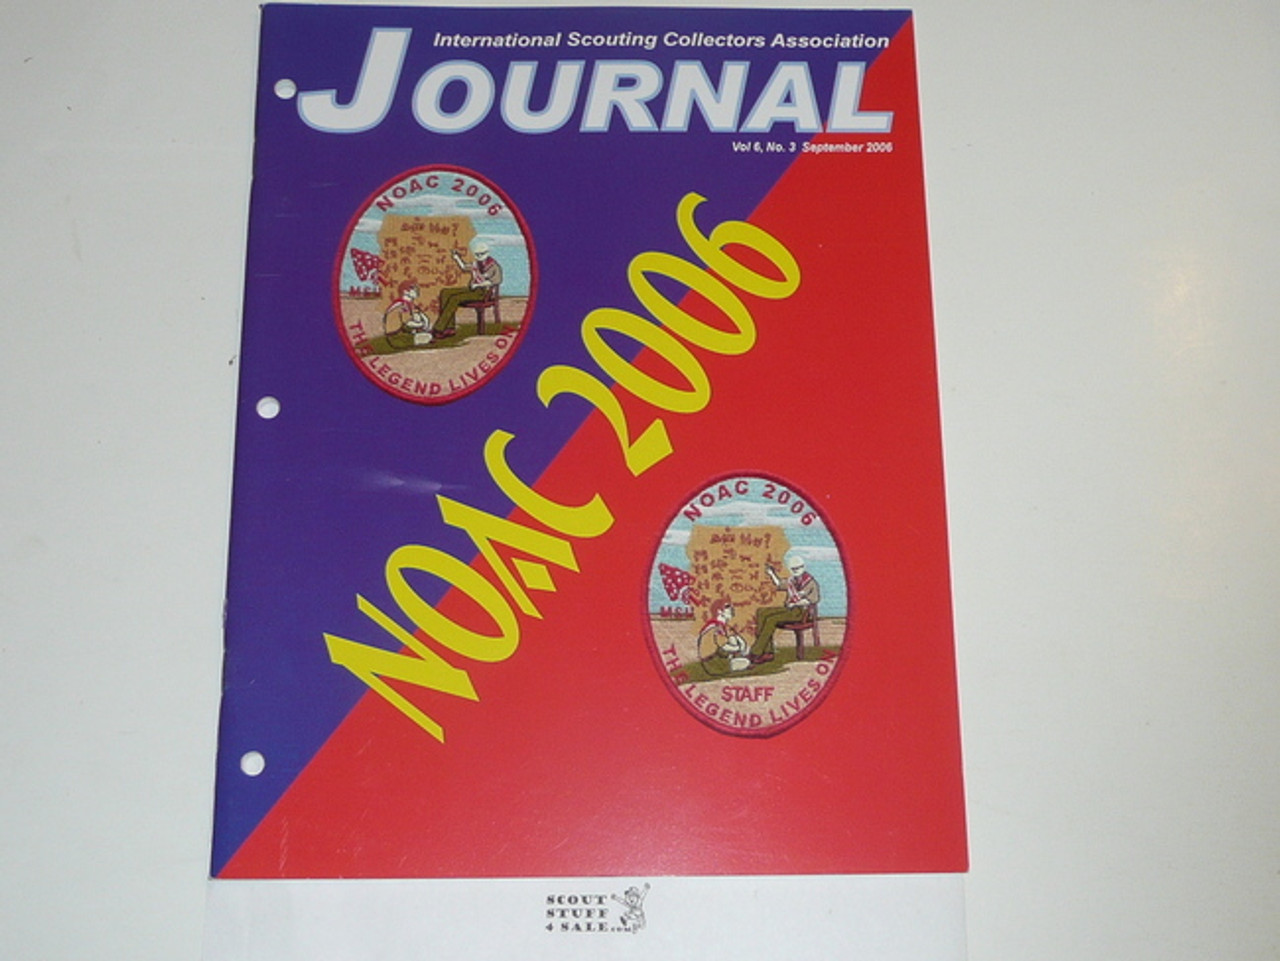 The International Scouting Collectors Association (ISCA) Journal, 2006 September, Vol 6 #3